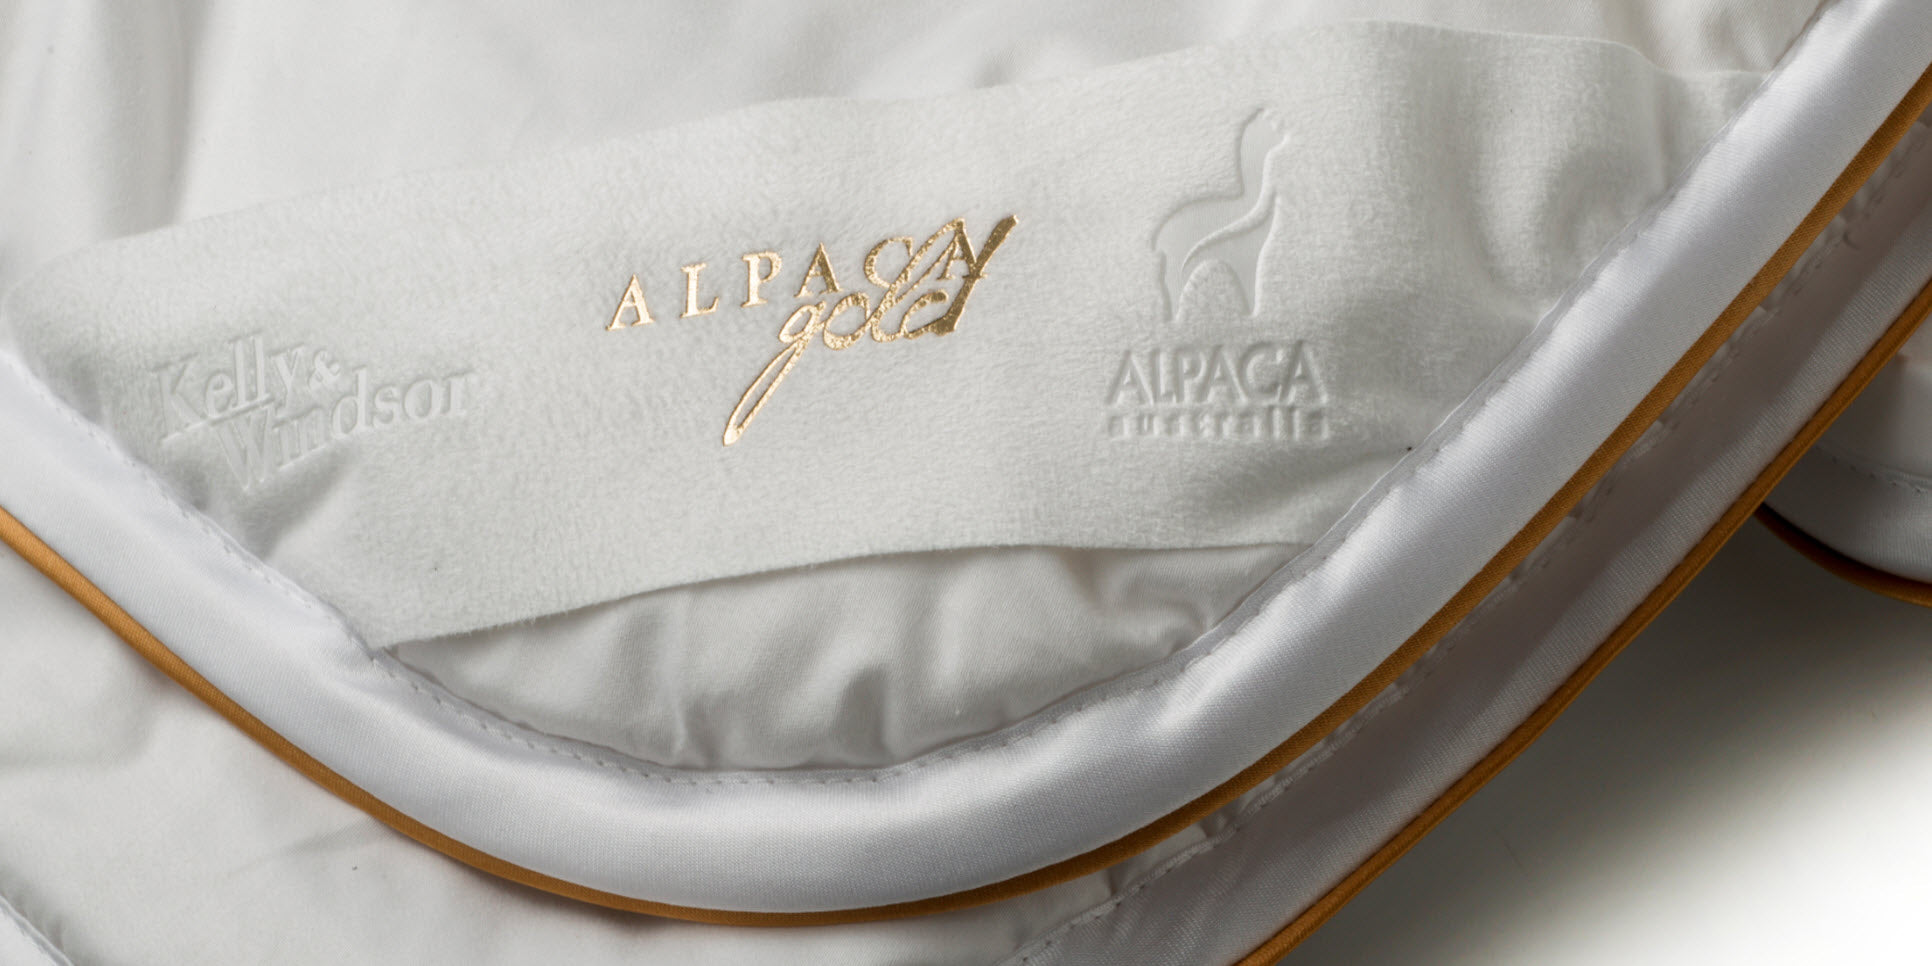 Luxury trim and binding on alpaca gold quilts